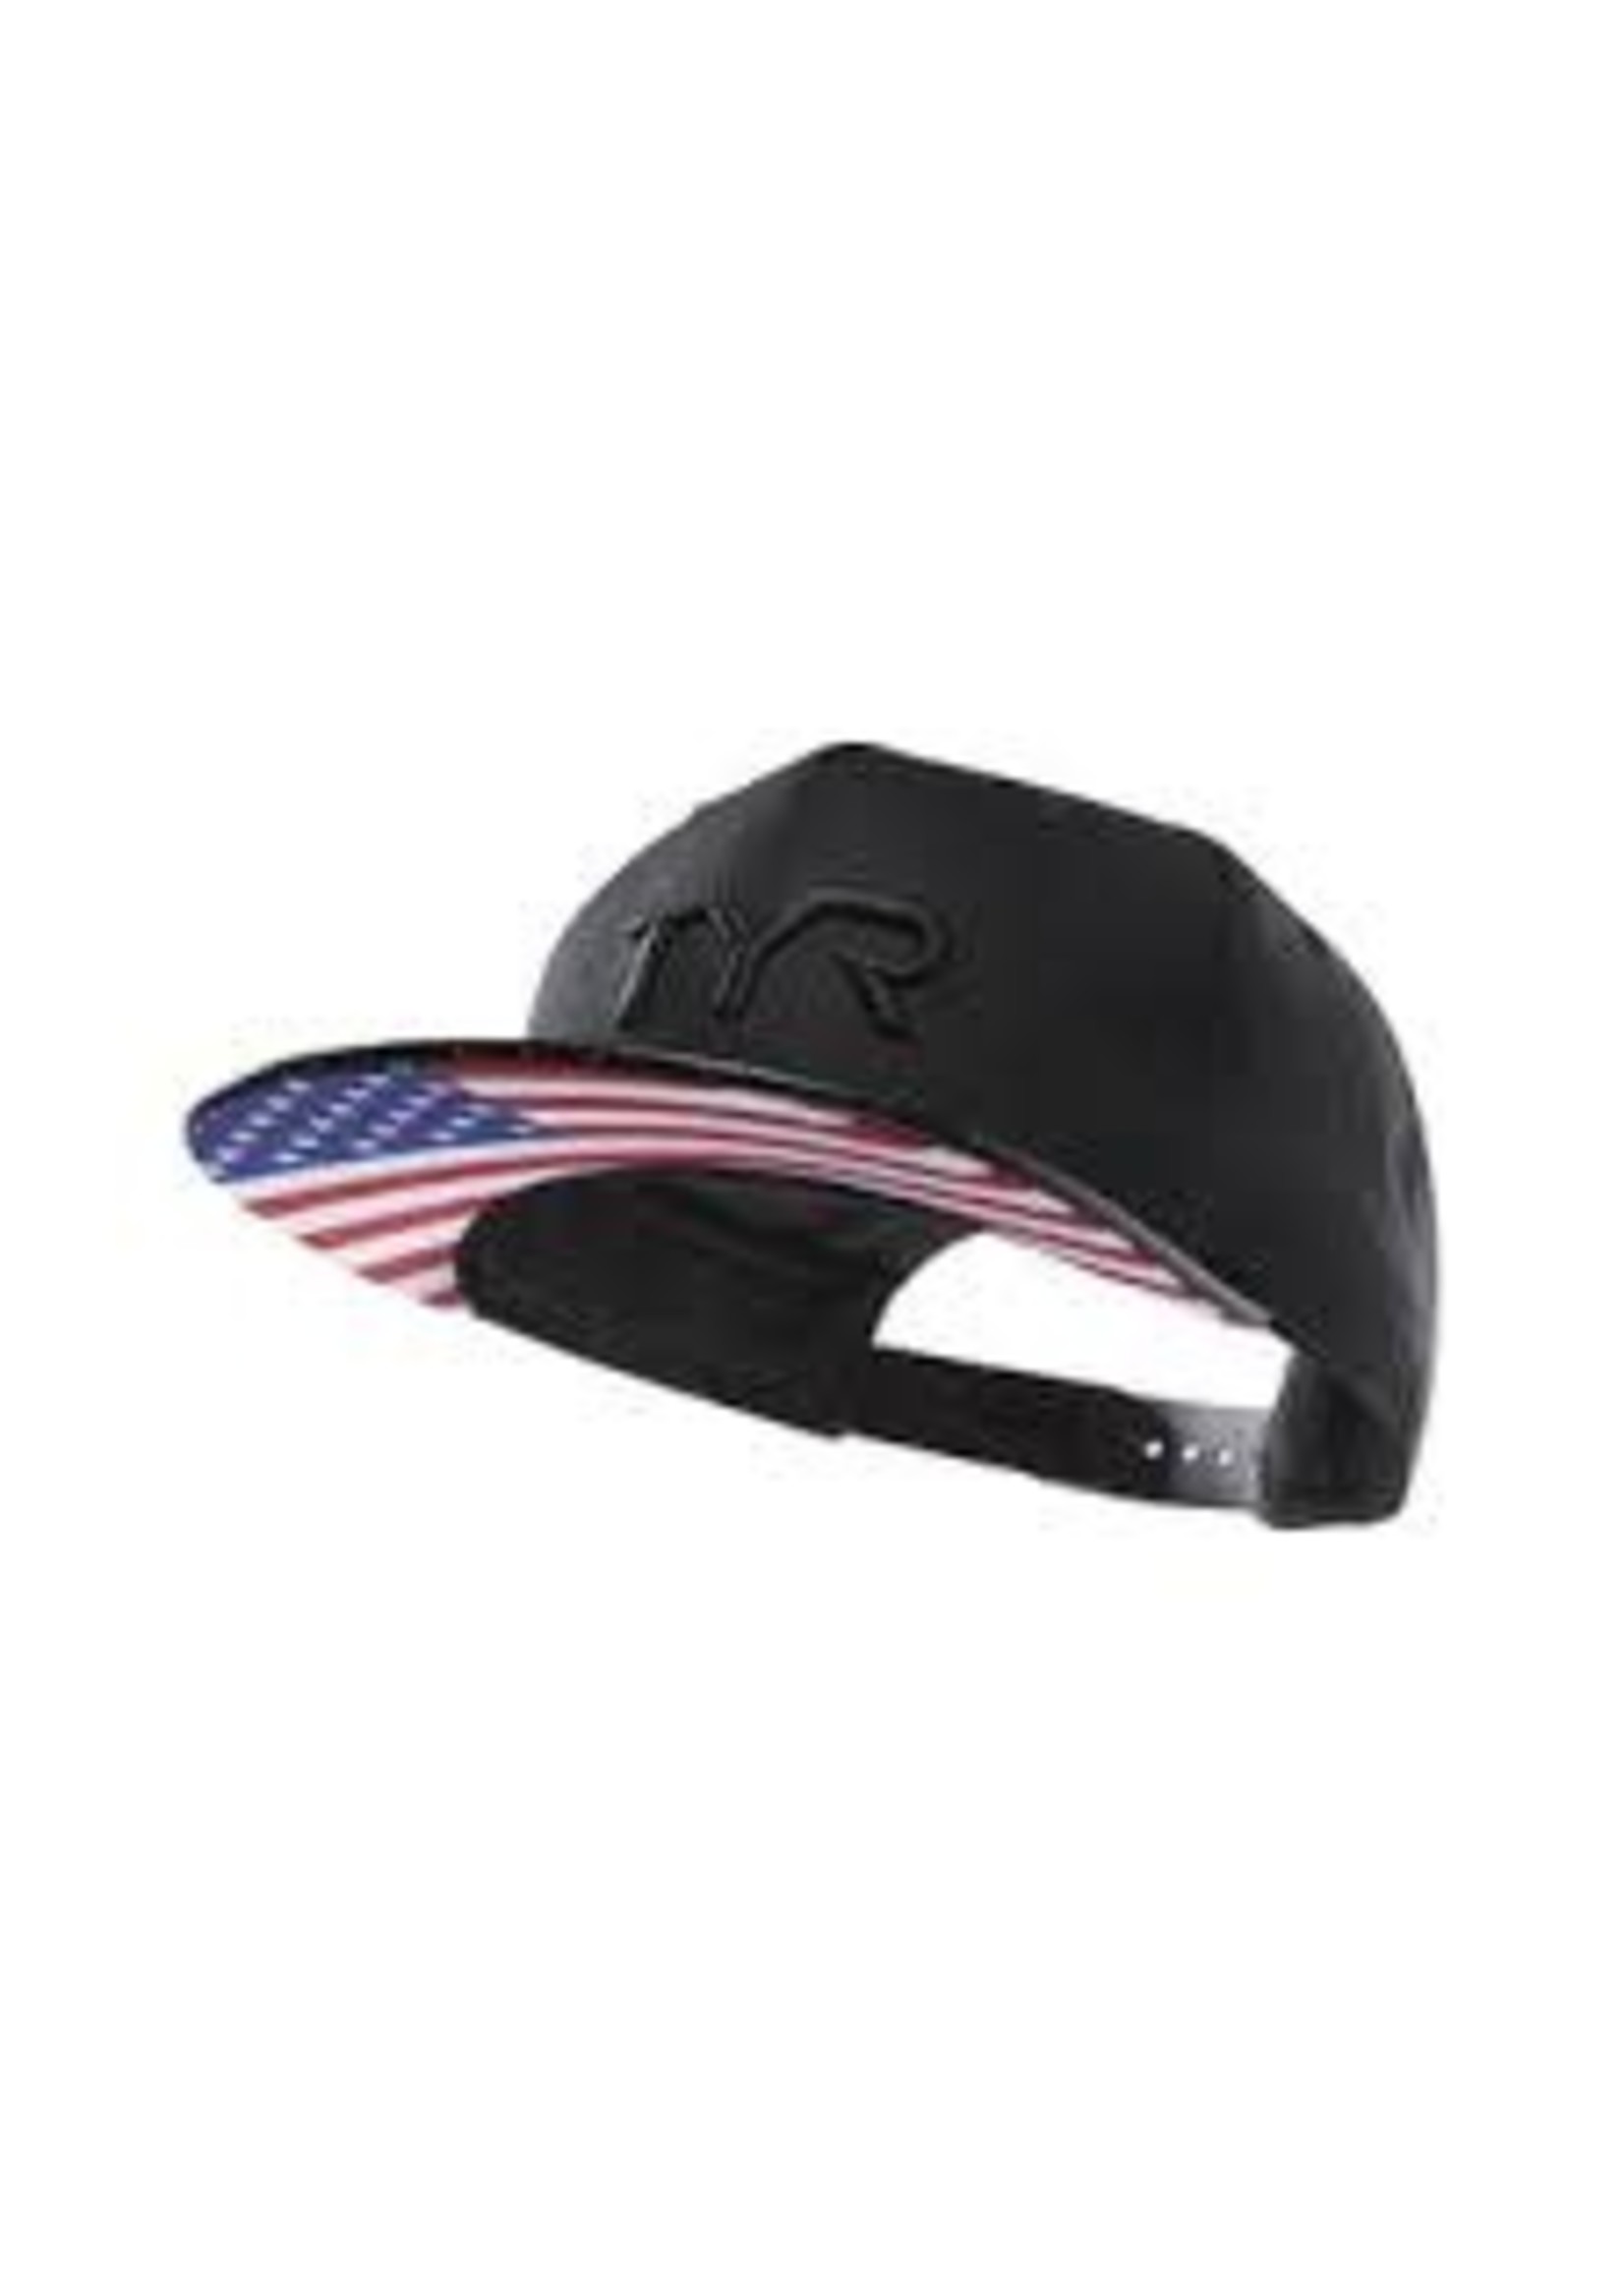 TYR STARS AND STRIPES HAT